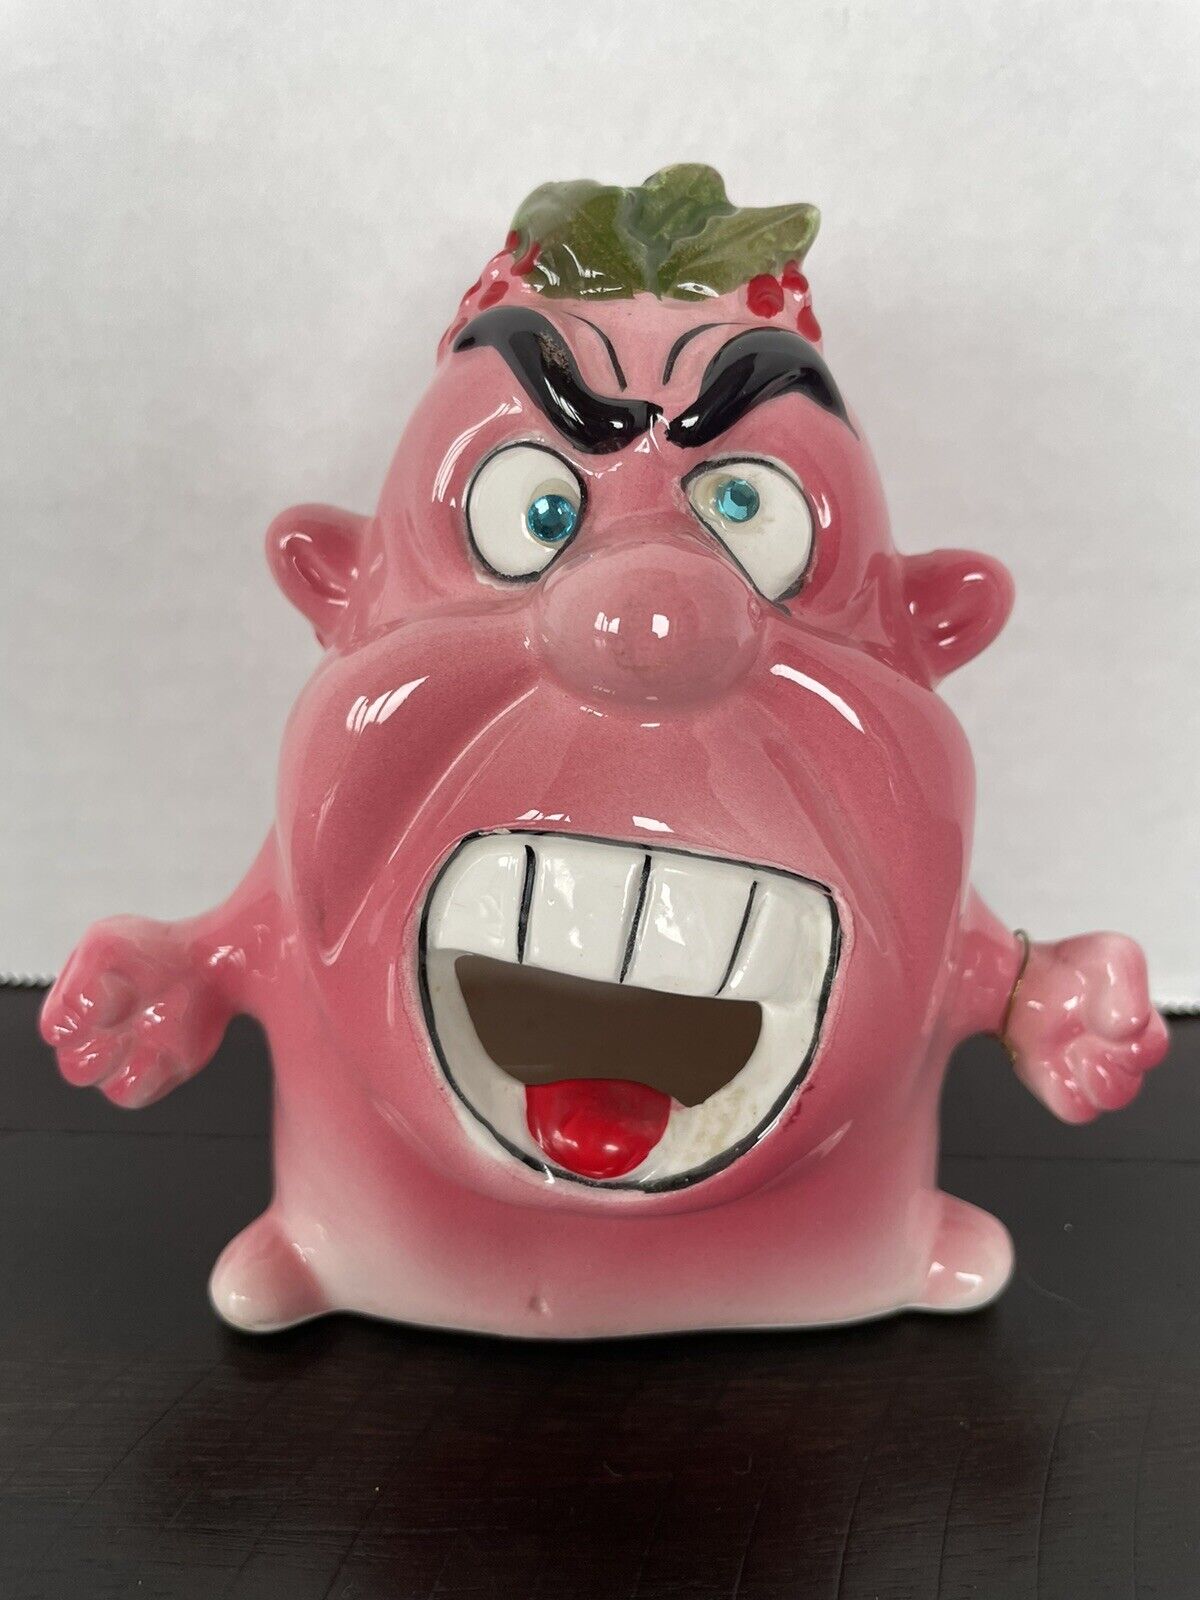 Vintage Collectable Kreiss Psycho Ceramic 1960’s Angry Pink Guy